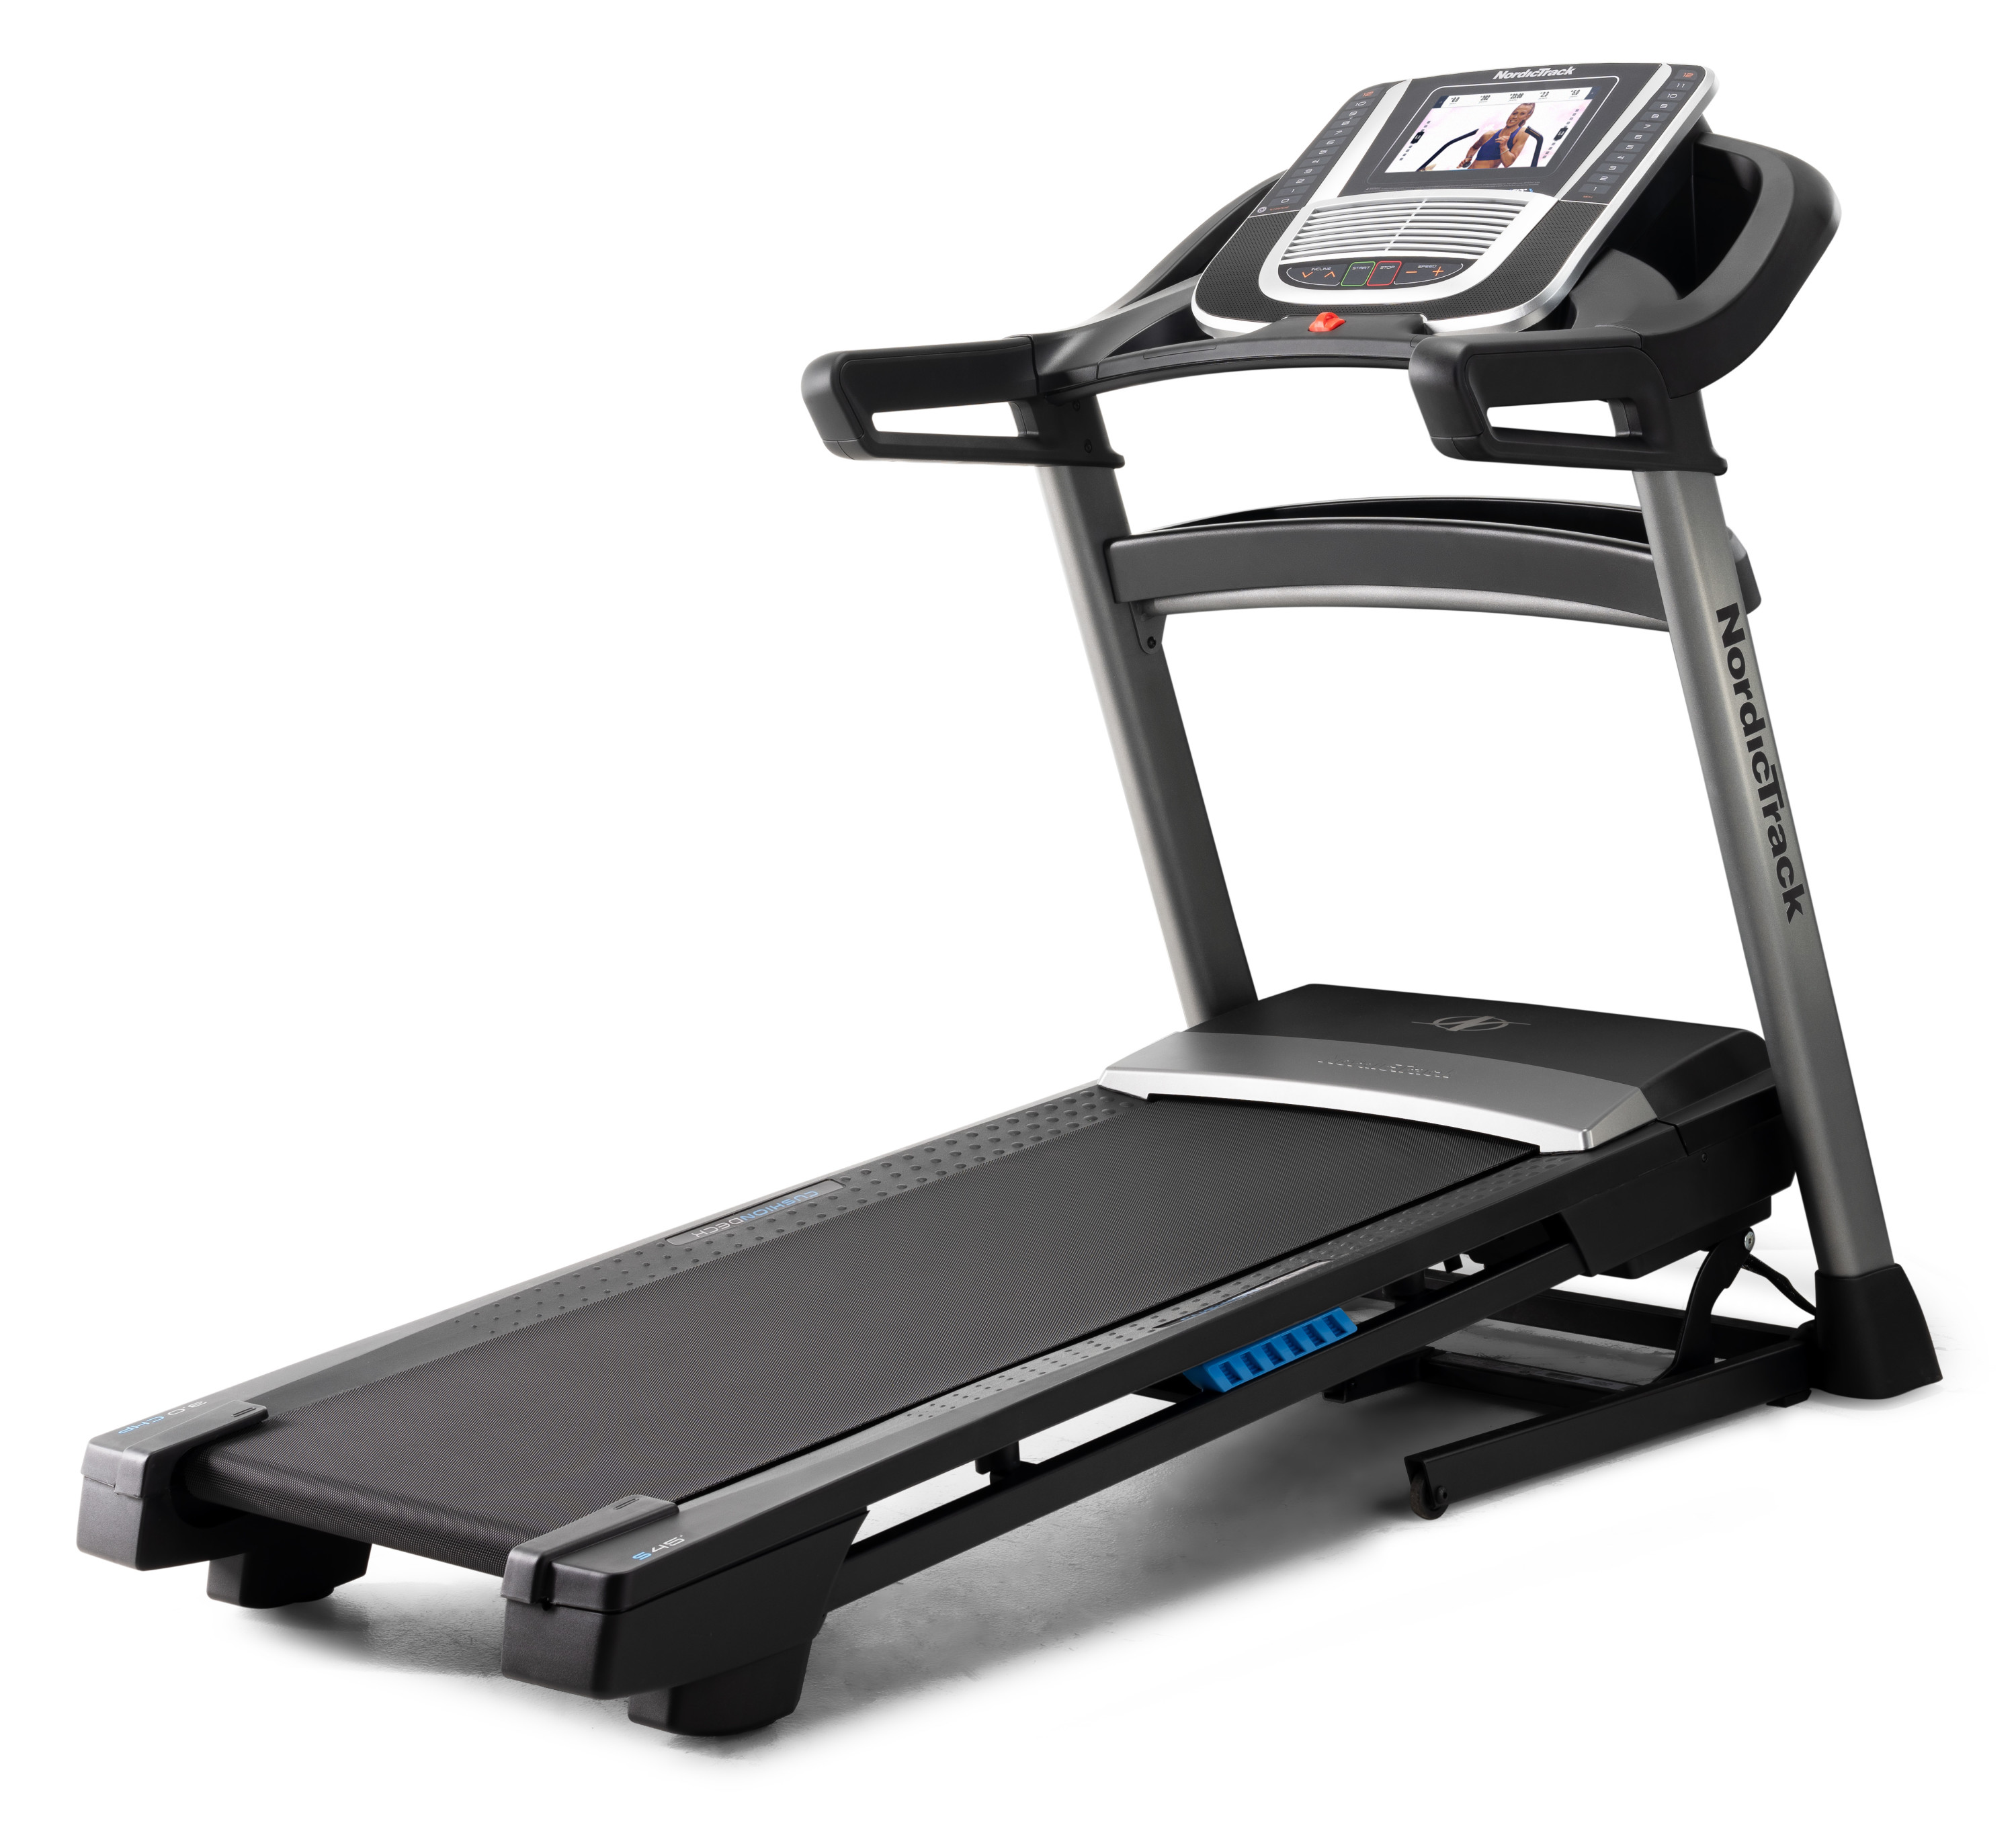 NordicTrack C 1100i Smart Treadmill with 10” Touchscreen and and 30-Day iFIT Family Membership - image 2 of 6